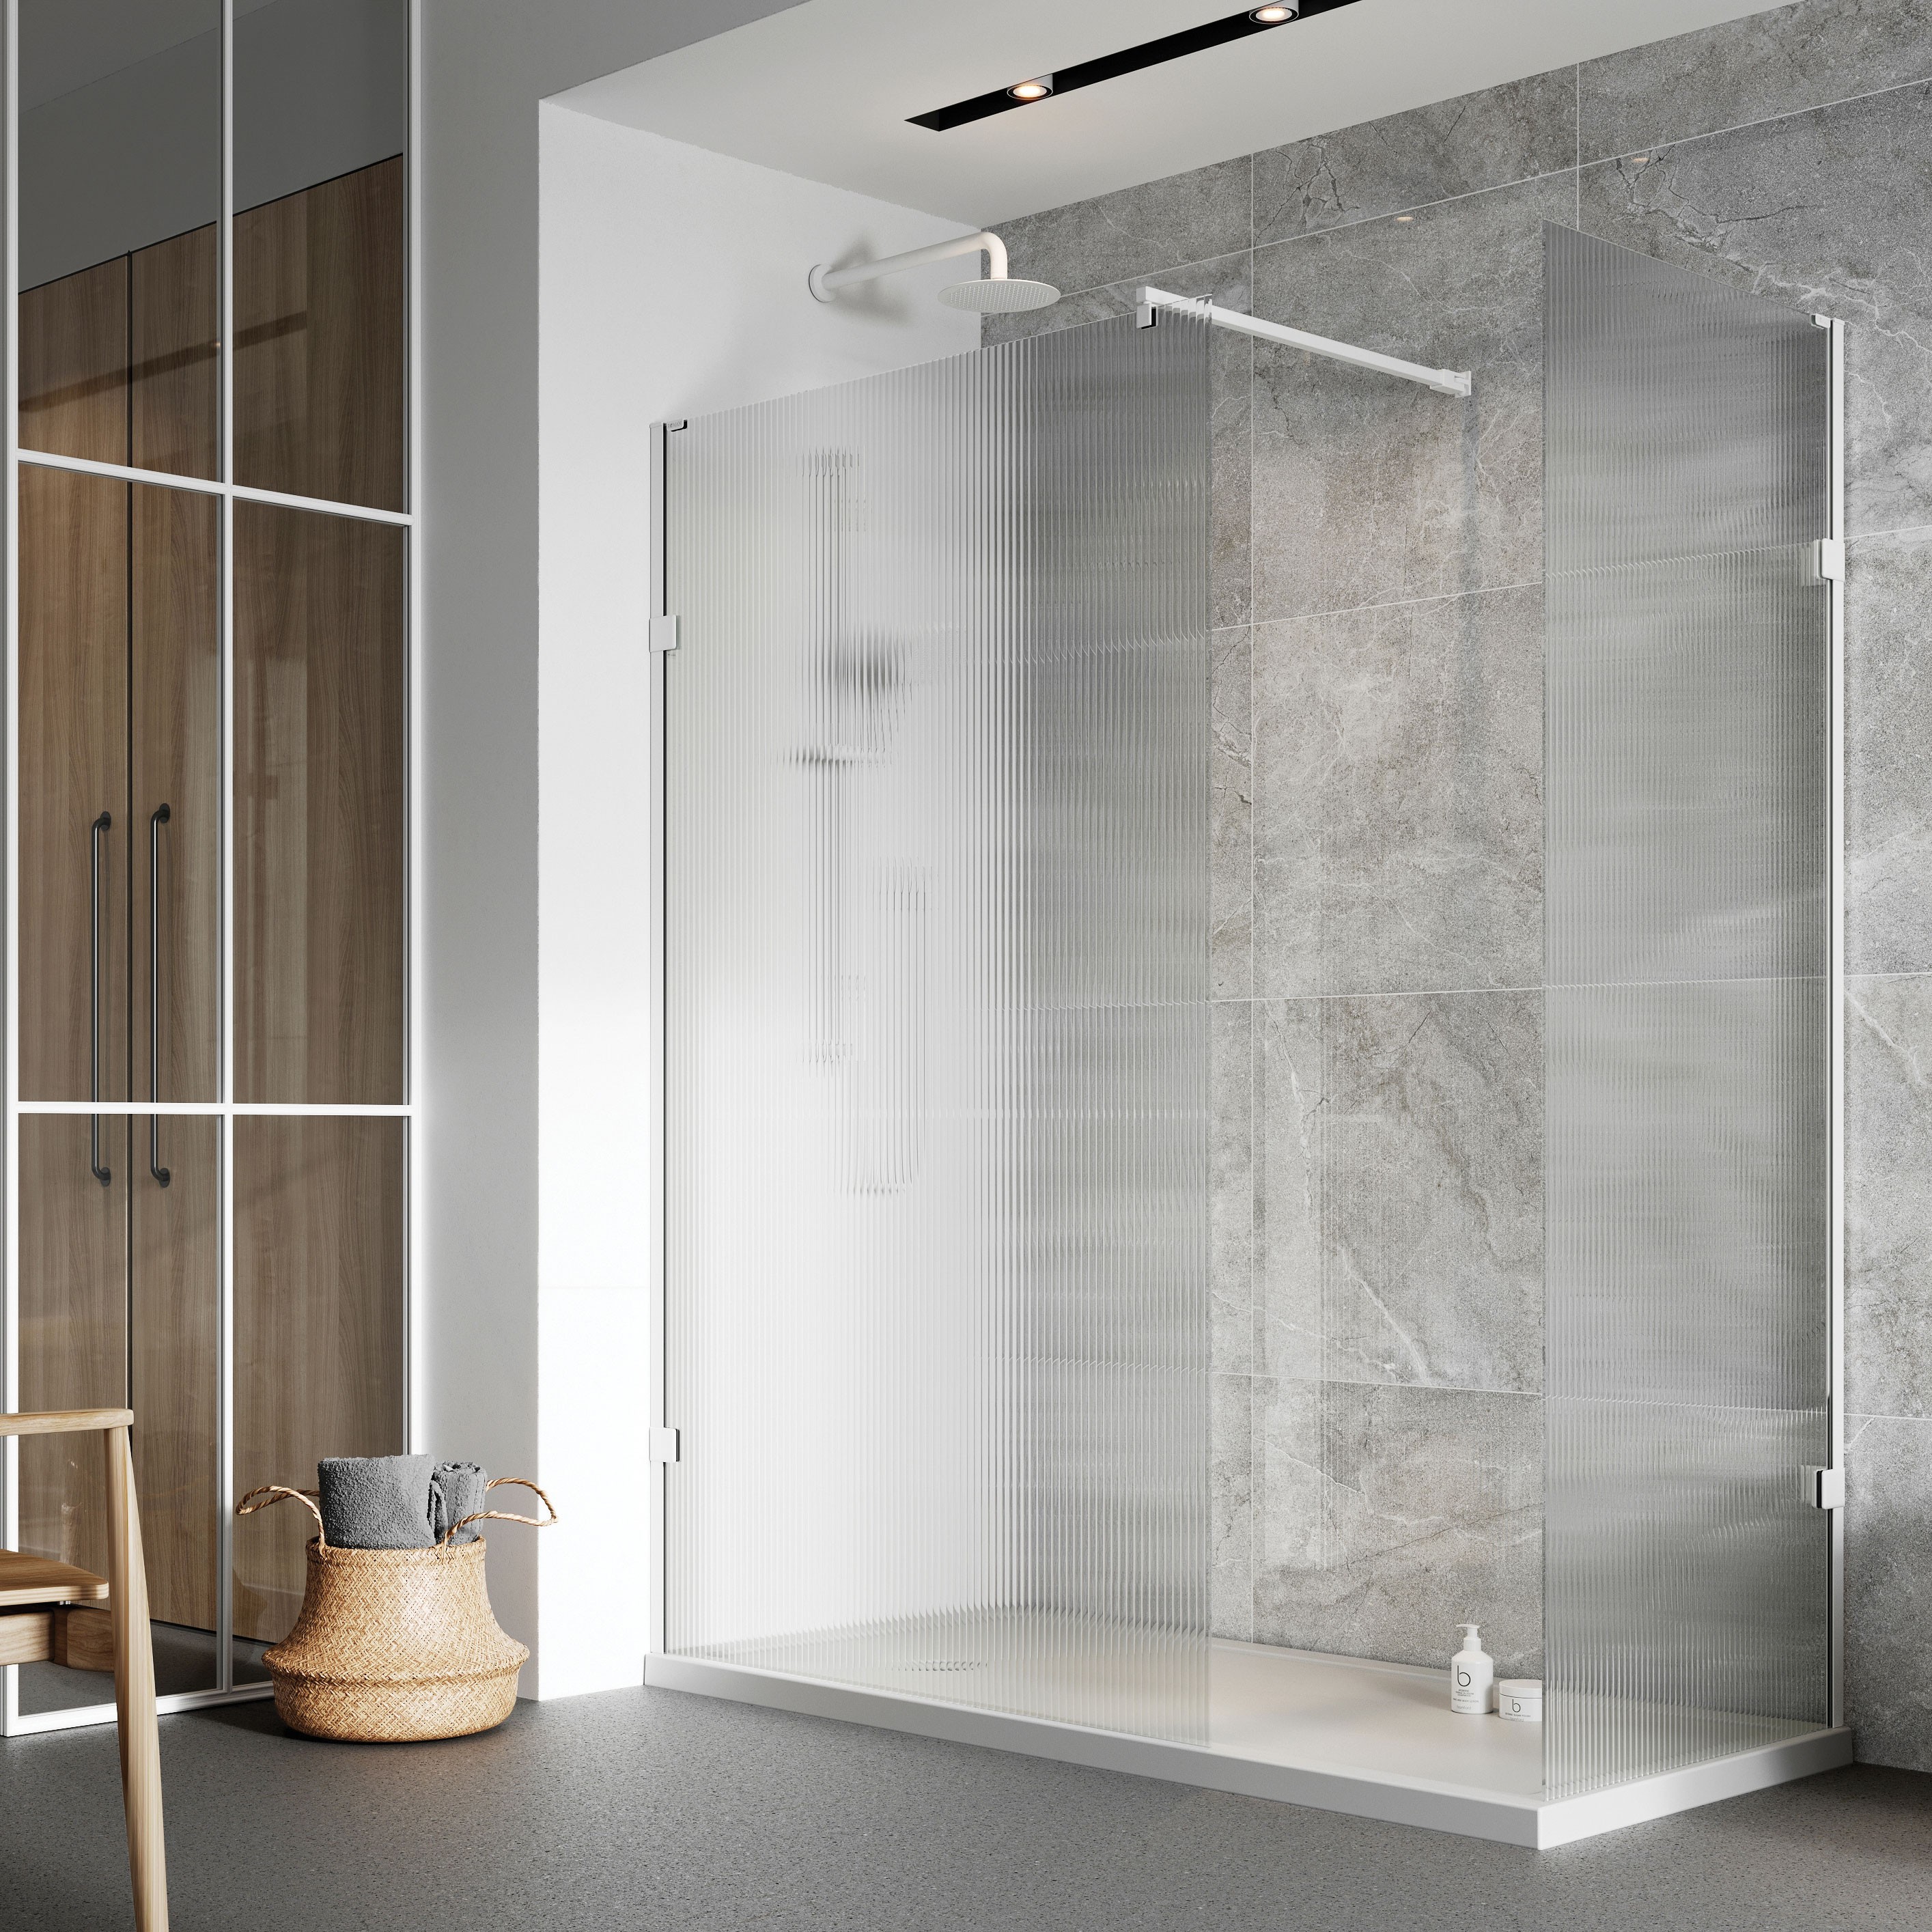 Roman Liberty Corner Wetroom Panel 1057mm Fluted Glass Matt White [KLCP11FW] [WETROOM PANEL ONLY - BRACE BARS/FIXINGS NOT INCLUDED]